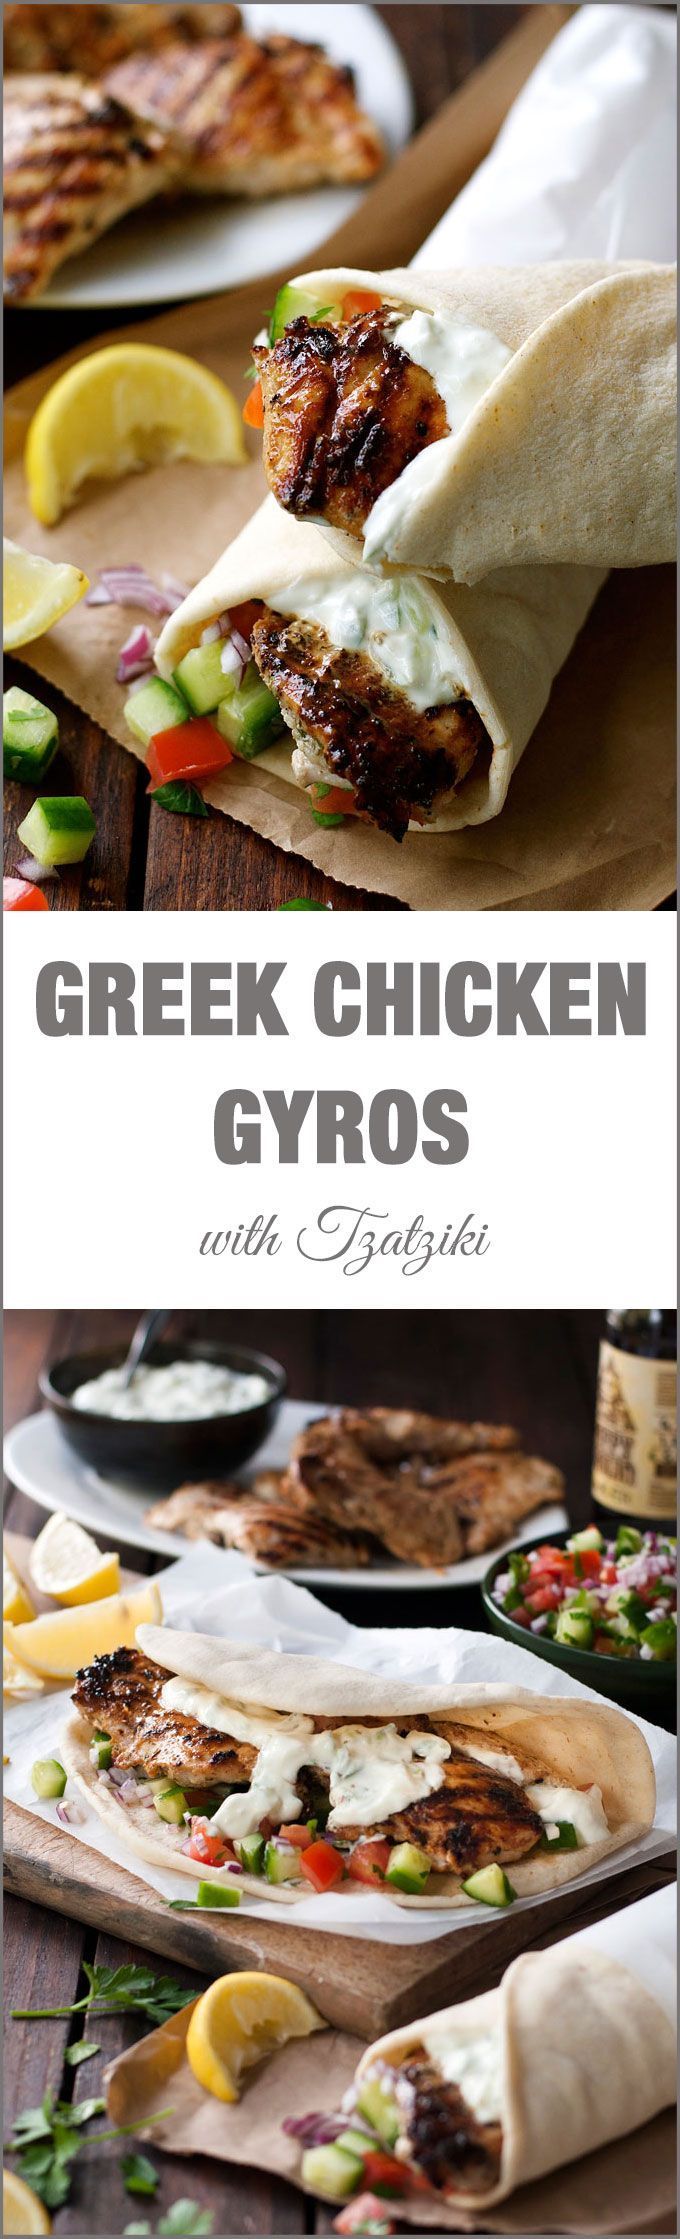 Greek Chicken Gyros with Tzatziki – the marinade for the chicken is so good, I use it even when I’m not making gyros!